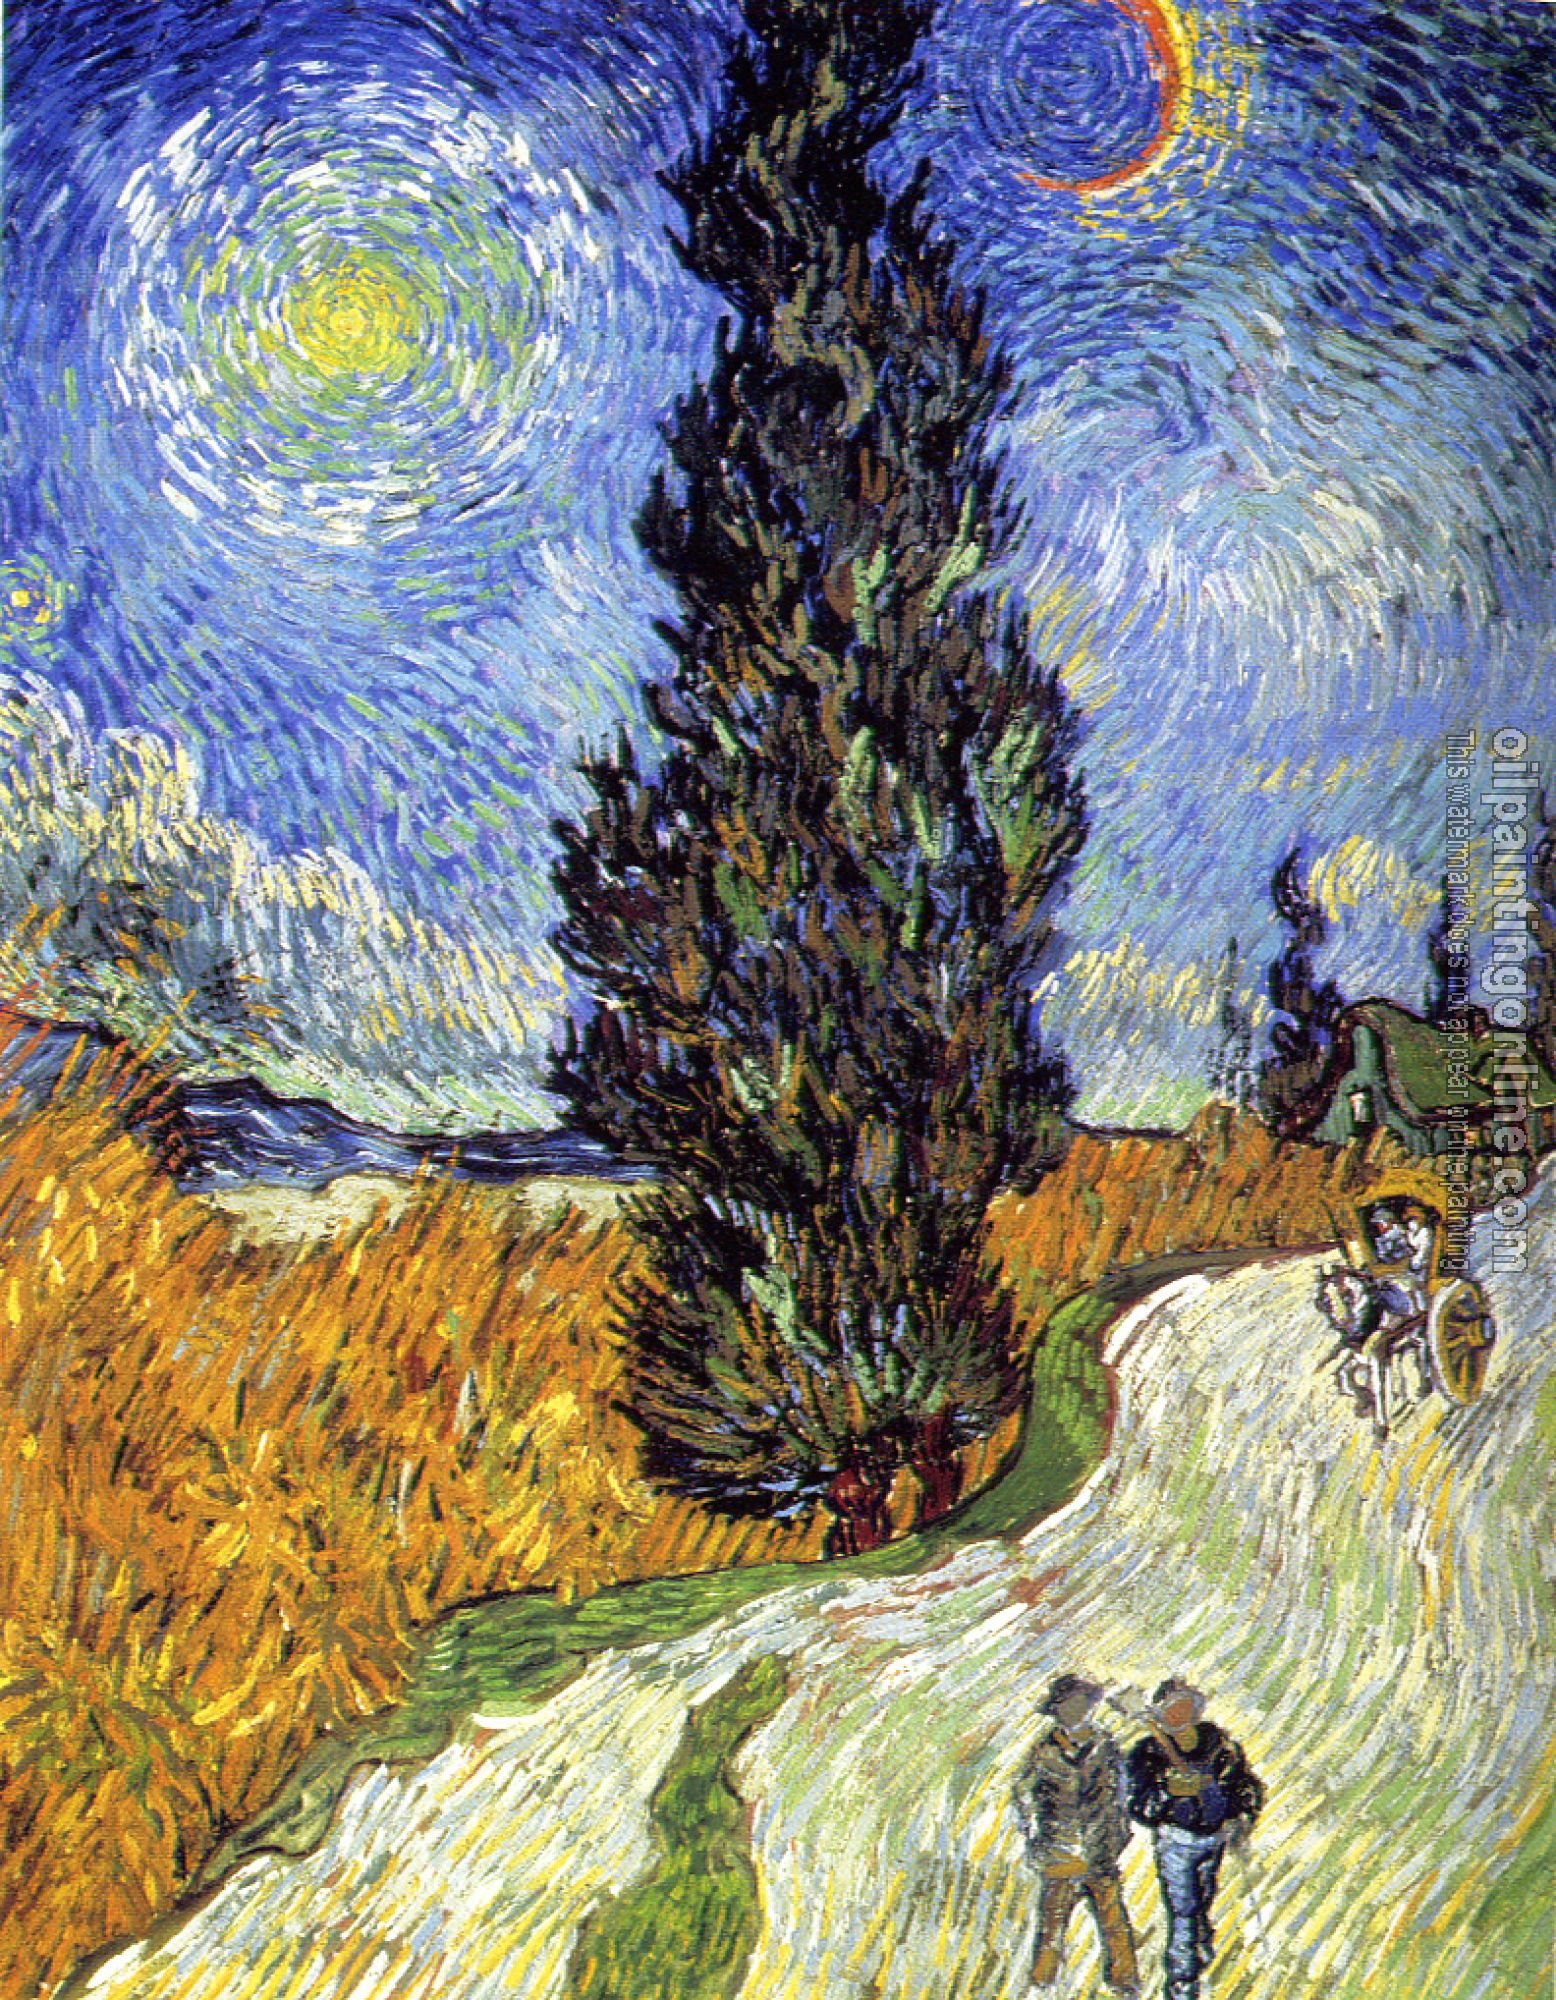 Gogh, Vincent van - Road with Men Walking, Carriage, Cypress, Star, and Crescent Moon